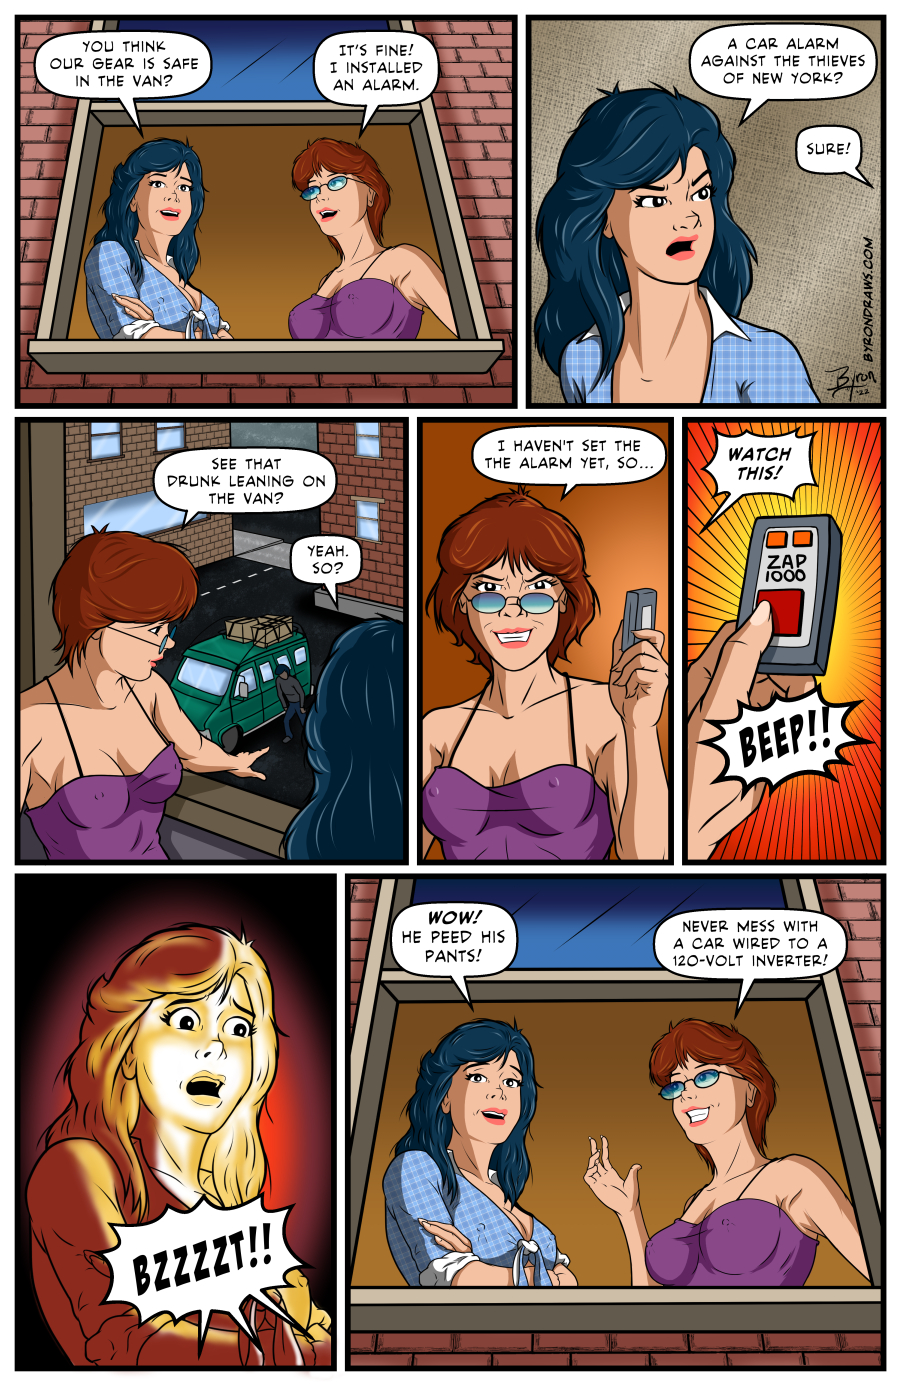 Taking On New York – Page 13